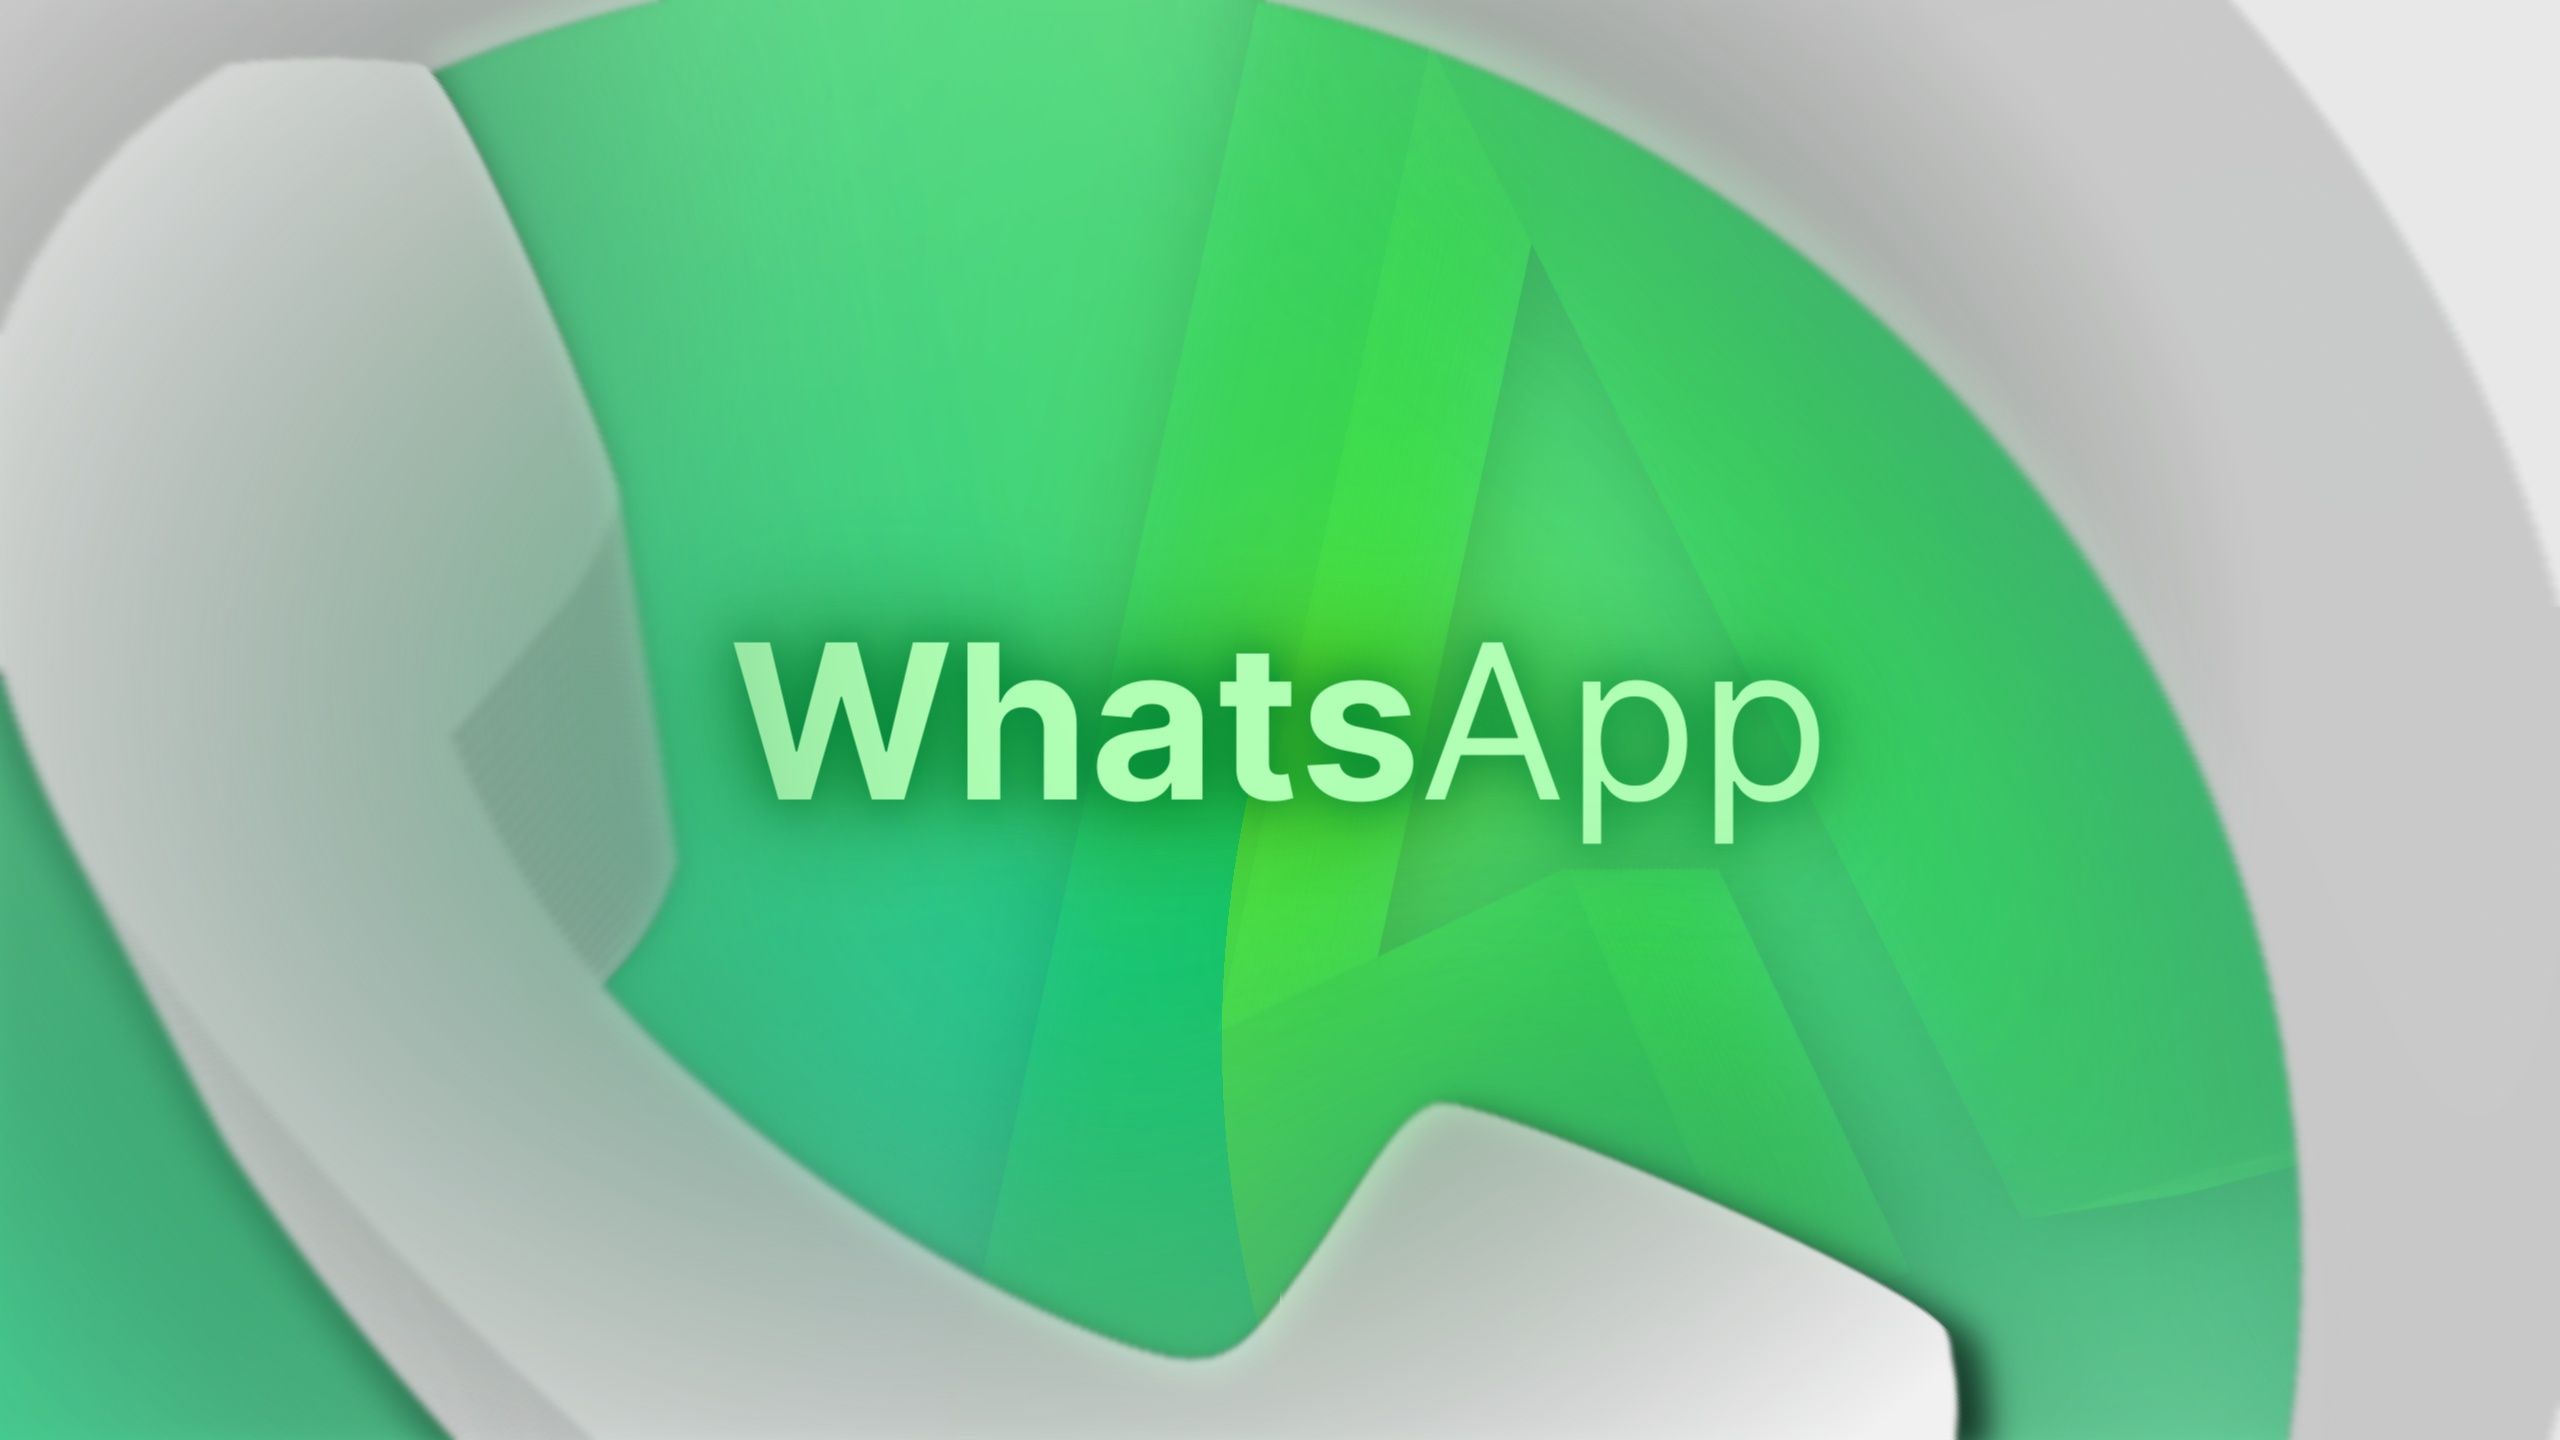 WhatsApp voice message transcription comes to Android a year after its debut on iOS